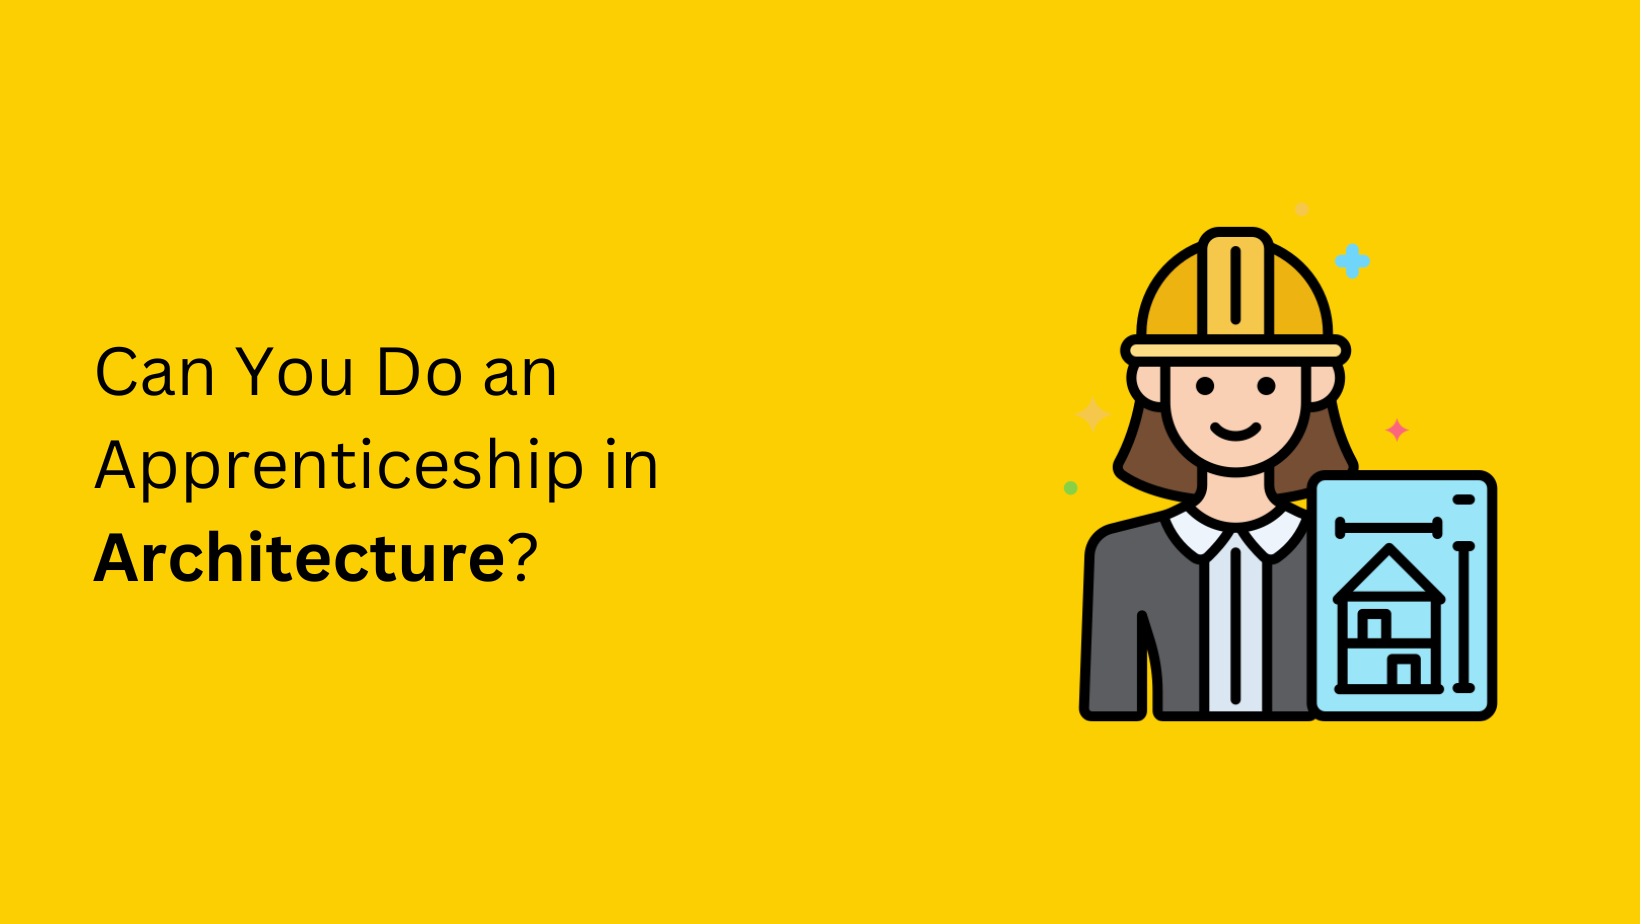 Can You Do an Apprenticeship in Architecture